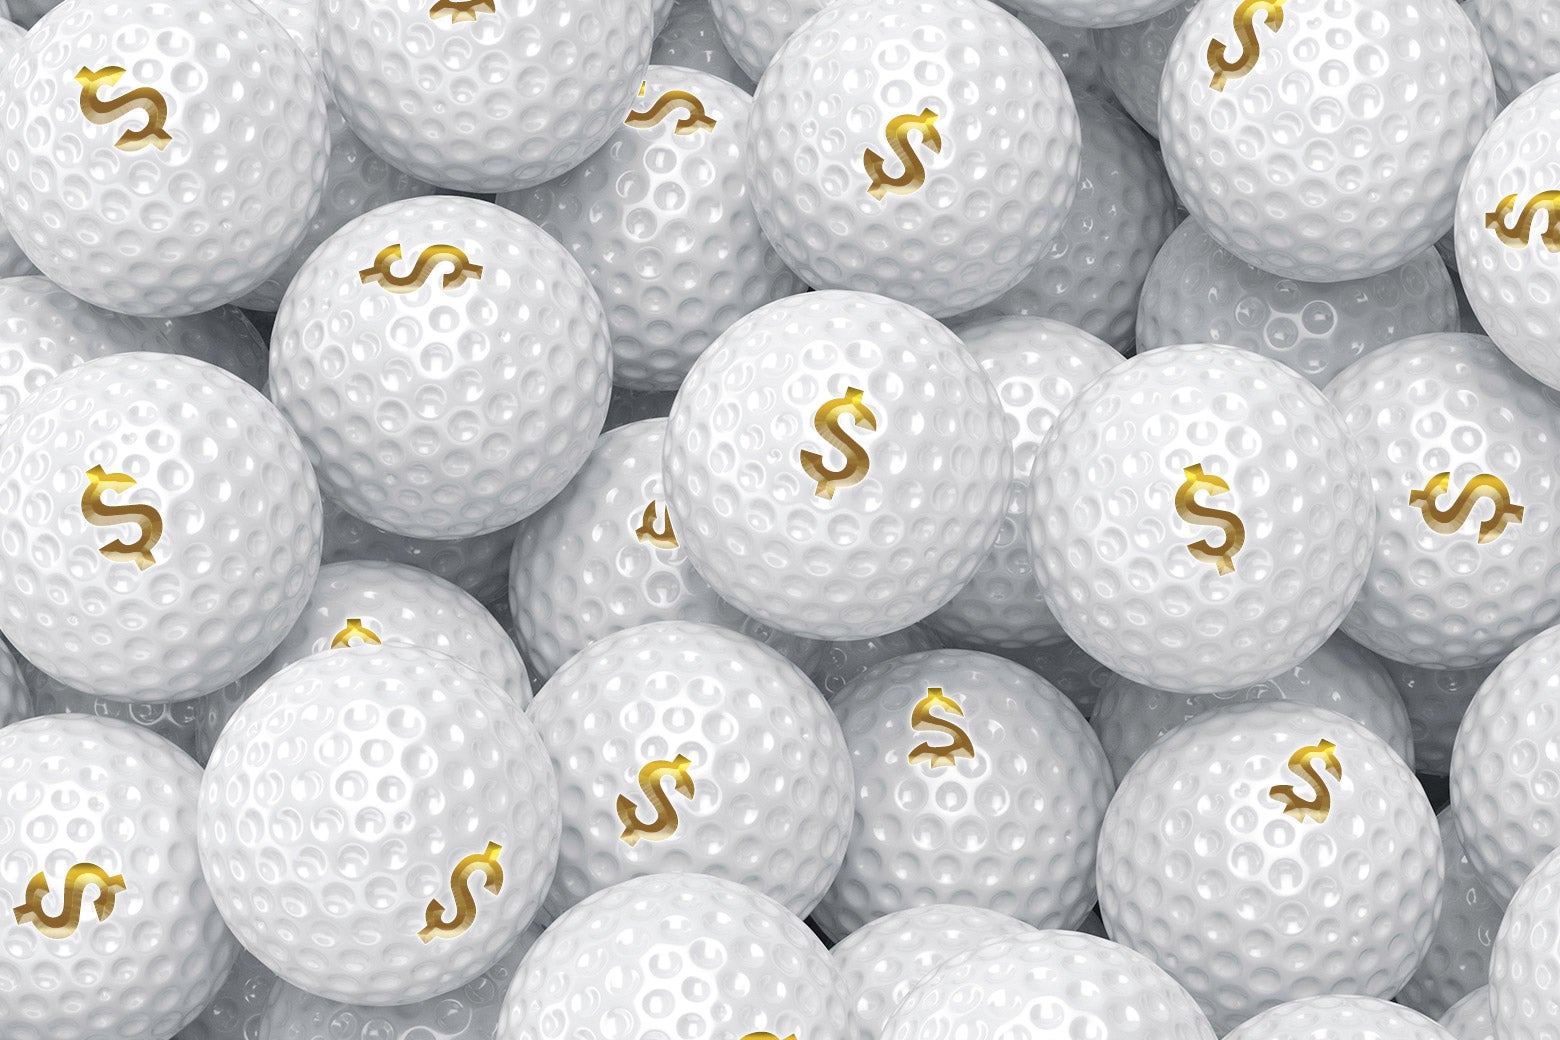 The golf ball rollback is a bummer for ordinary golfers.